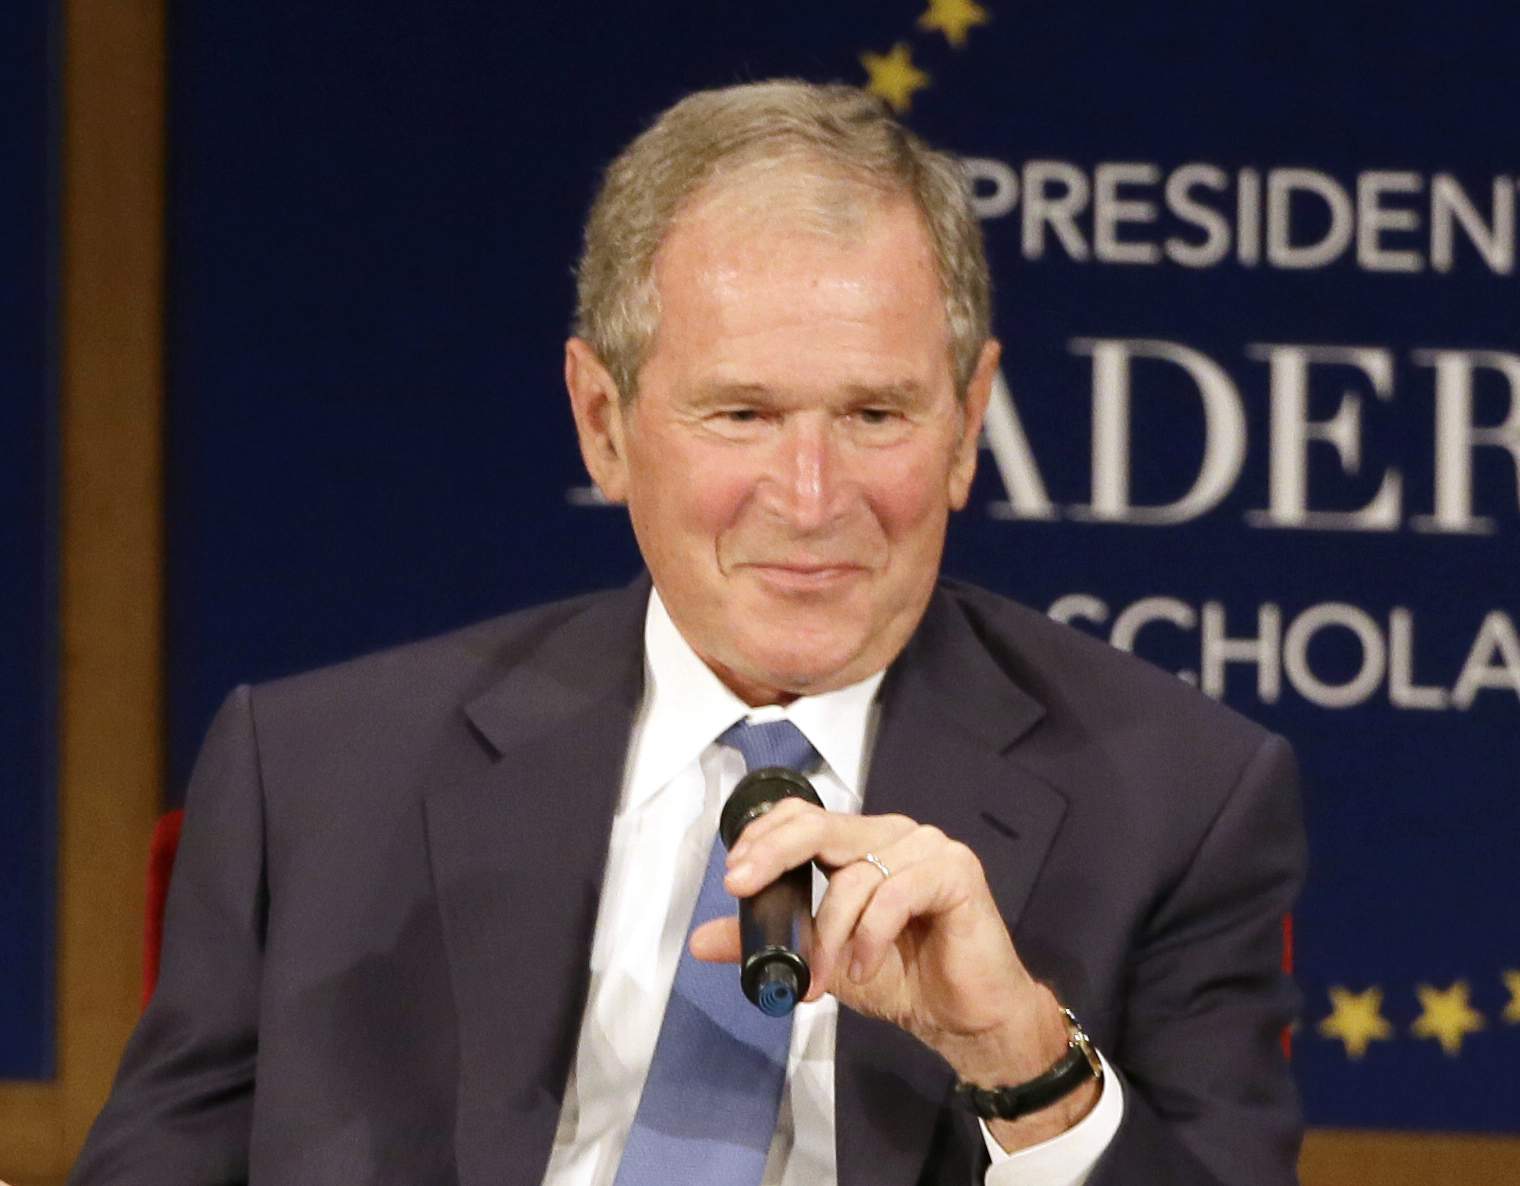 Former President Bush pays tribute to immigrants in new book